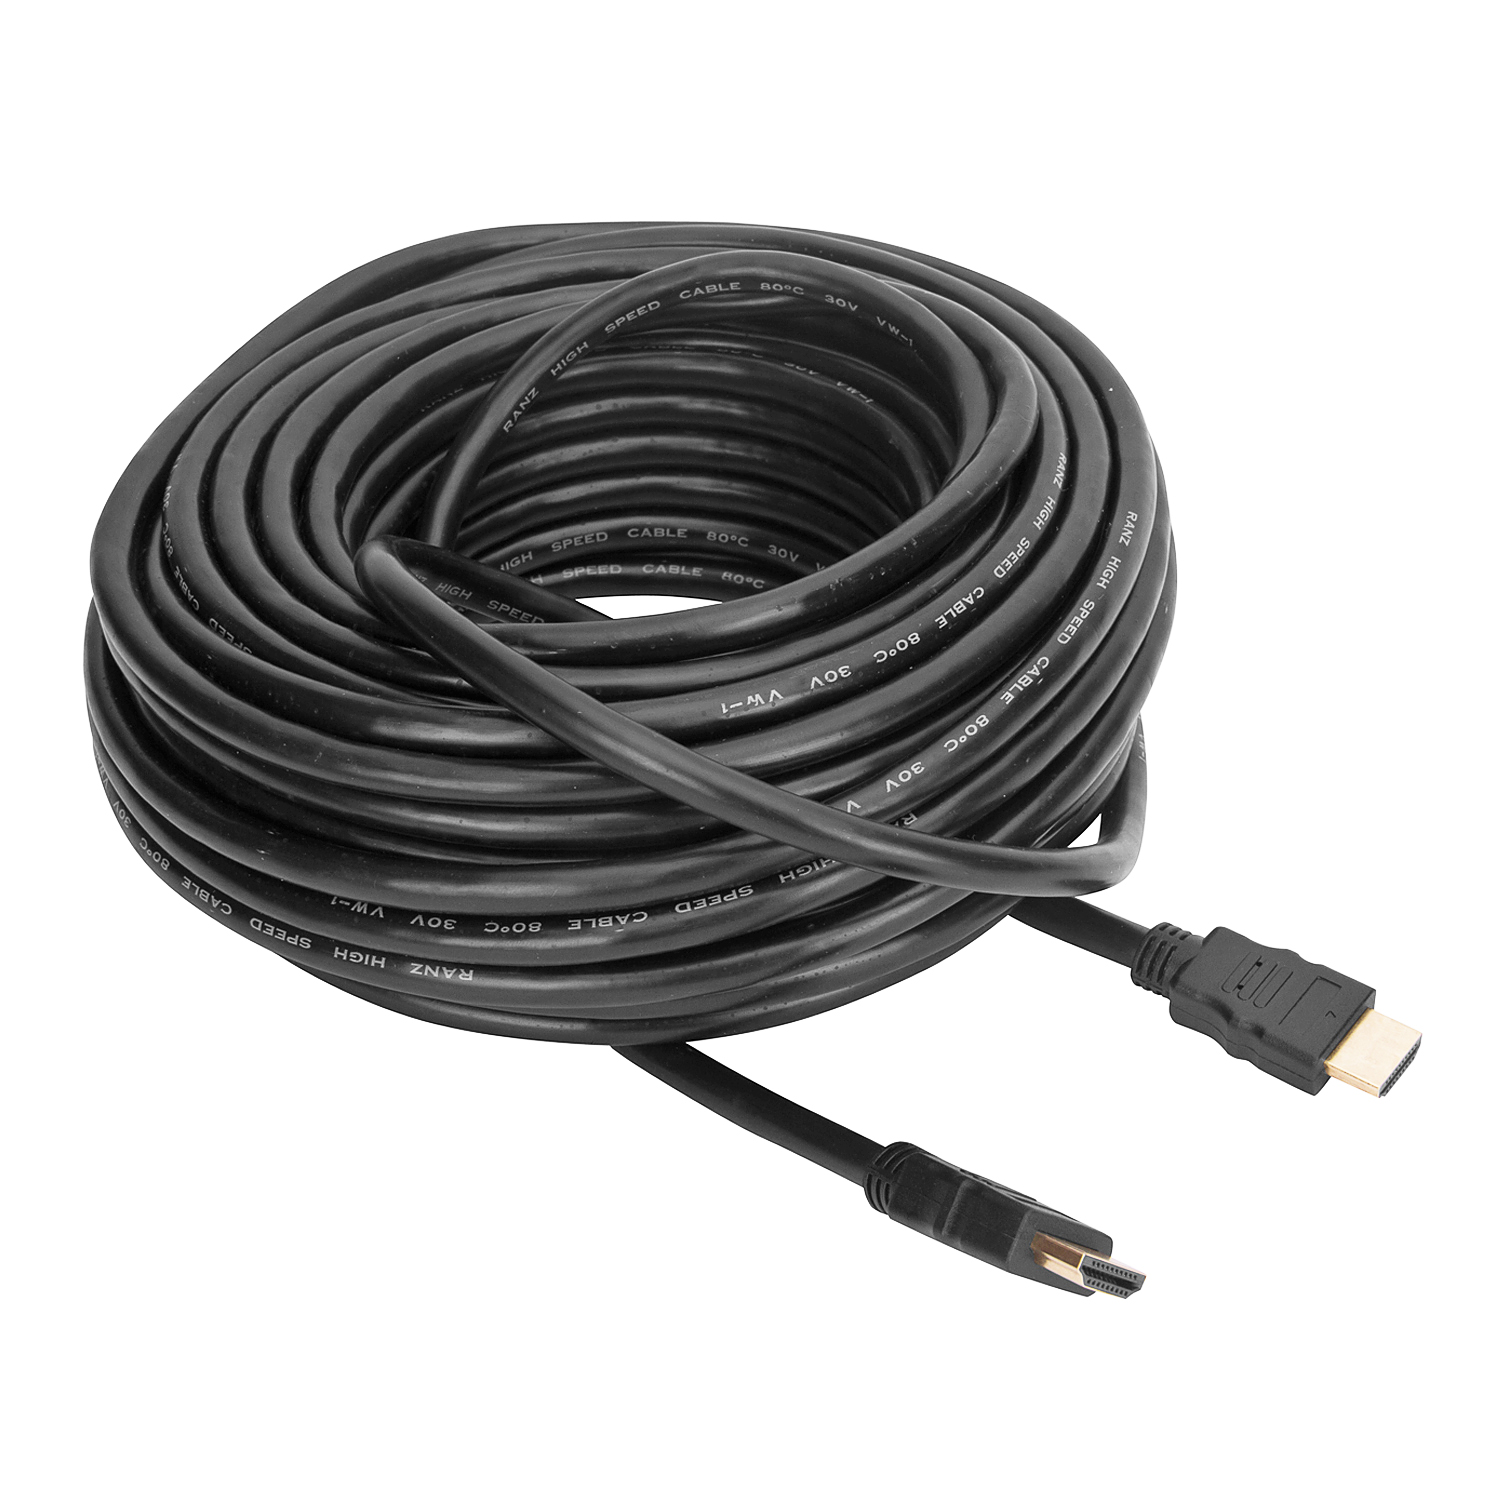 HDMI Cables Archives - RANZ